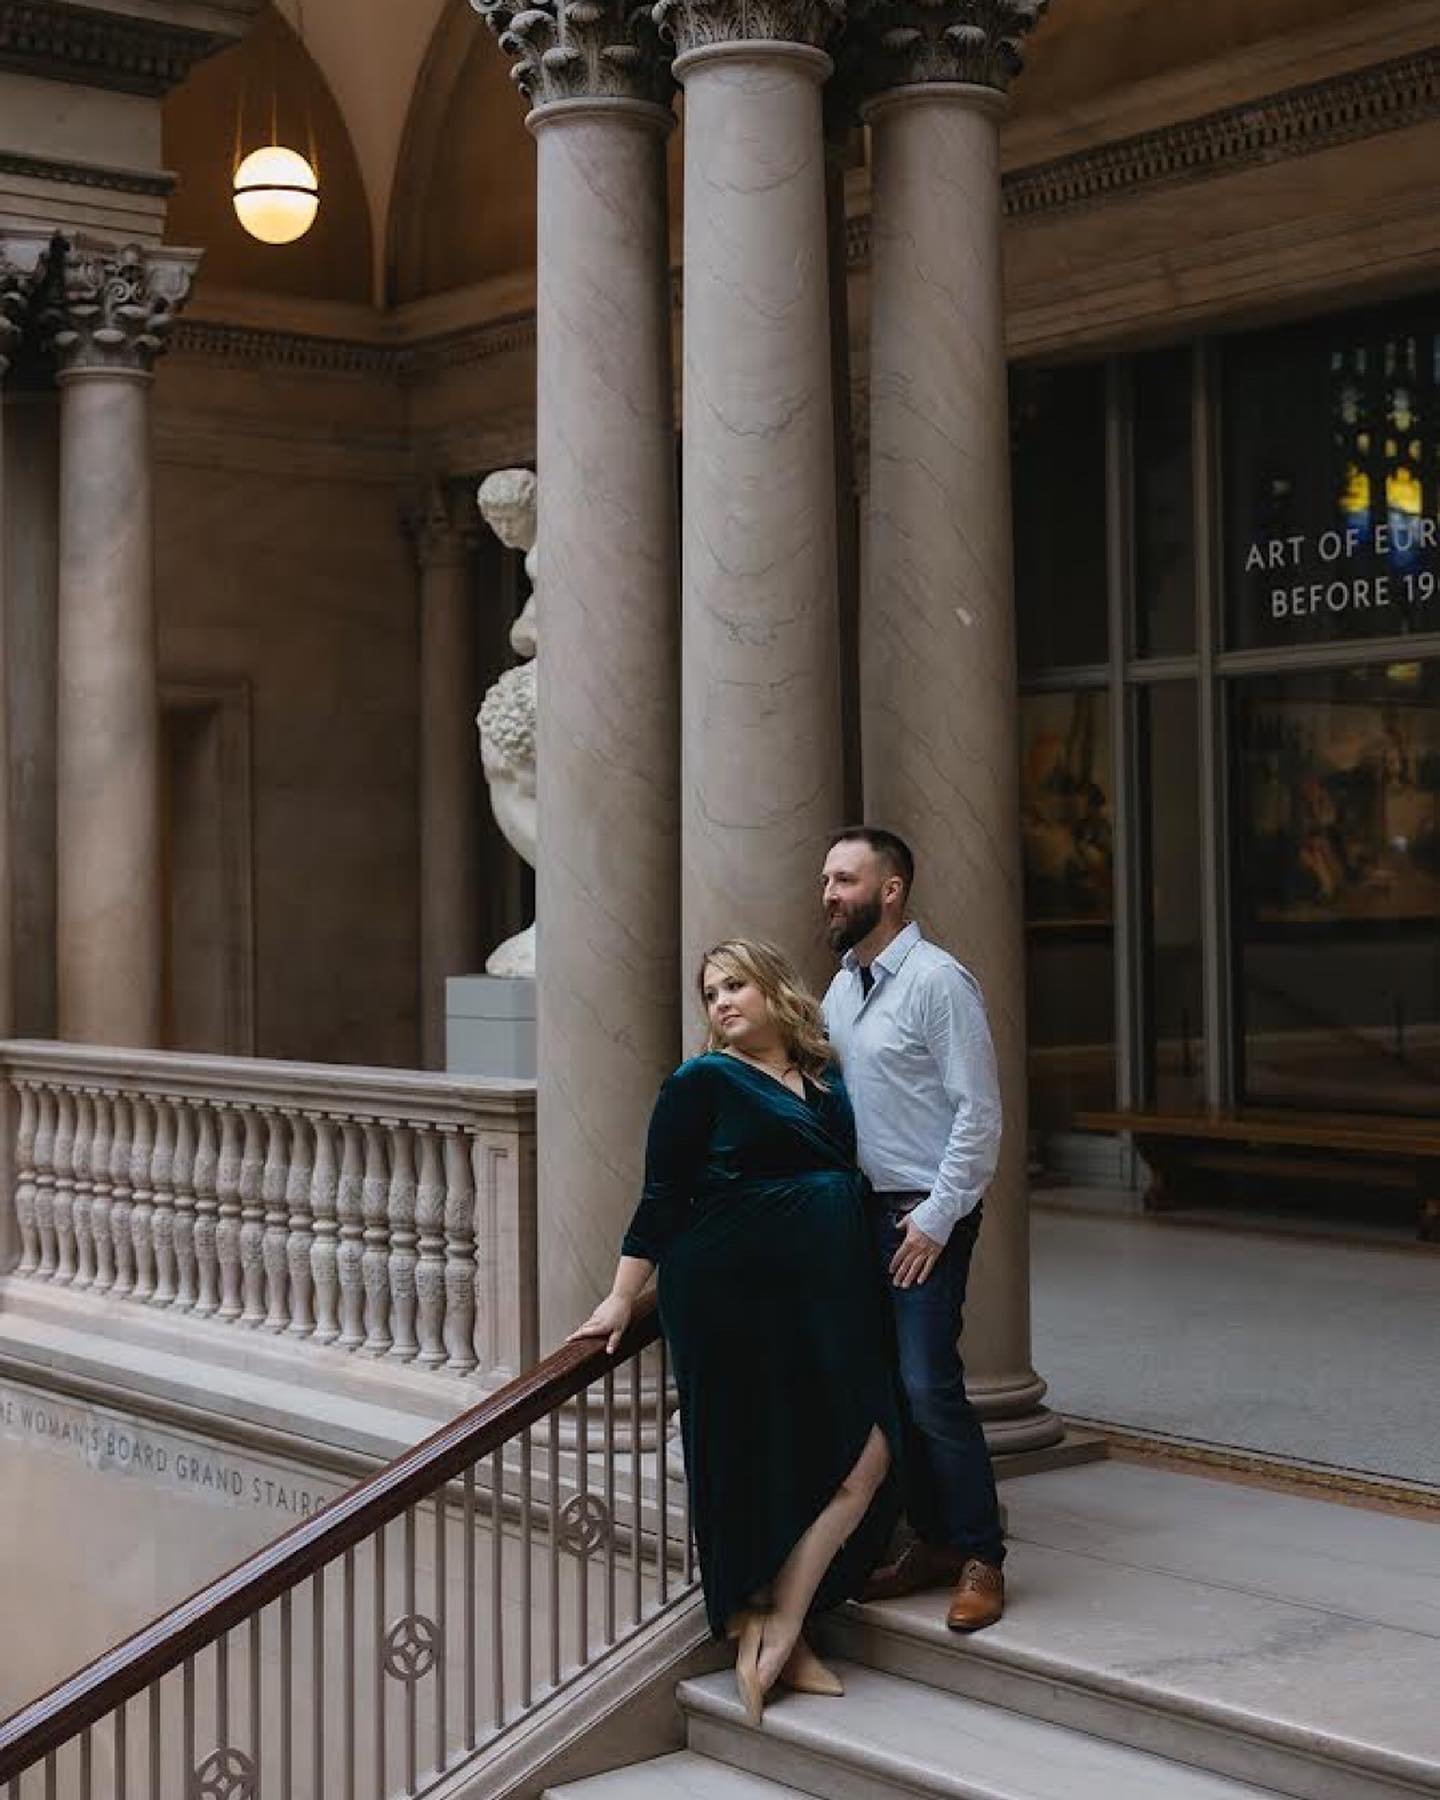 A gorgeous winter engagement session at the Chicago Art Institute with Salena &amp; Mike ❤️

Ring Design @heidigibsondesigns 

#chicagoengagement #chicagoweddingphotographer #chicagowedding #chicagobride #chicagoengagementphotographer #chicagoartmuse